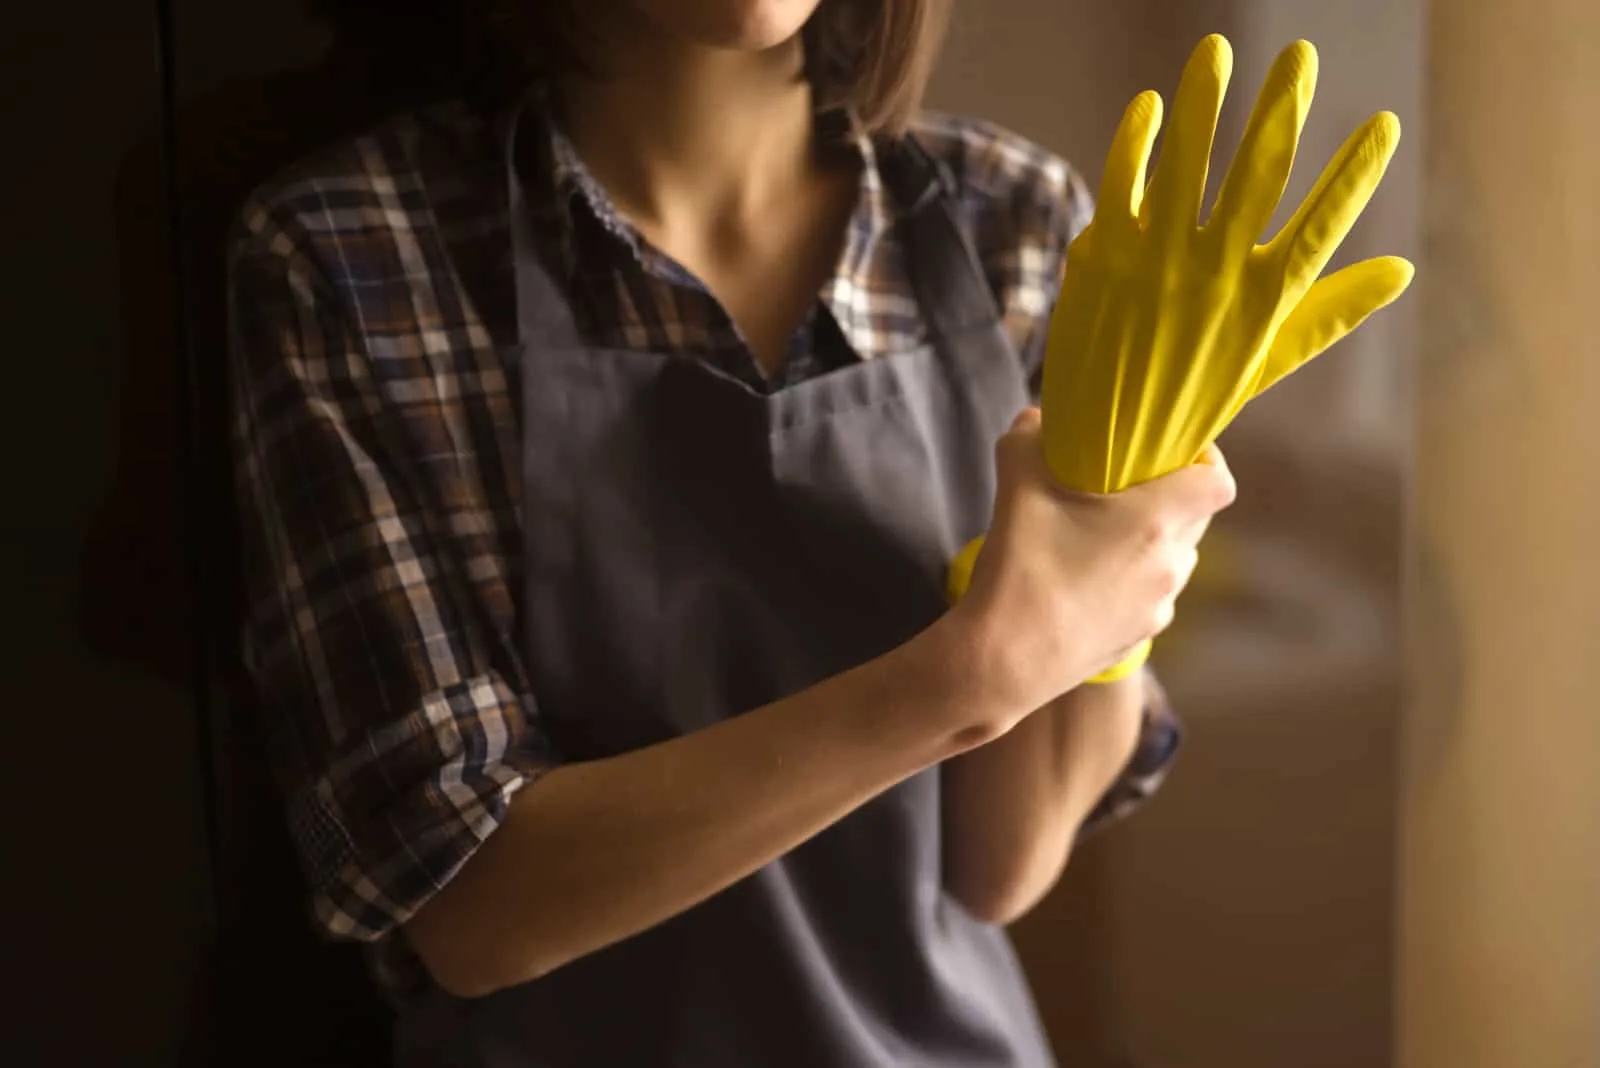 the woman puts gloves on her hands